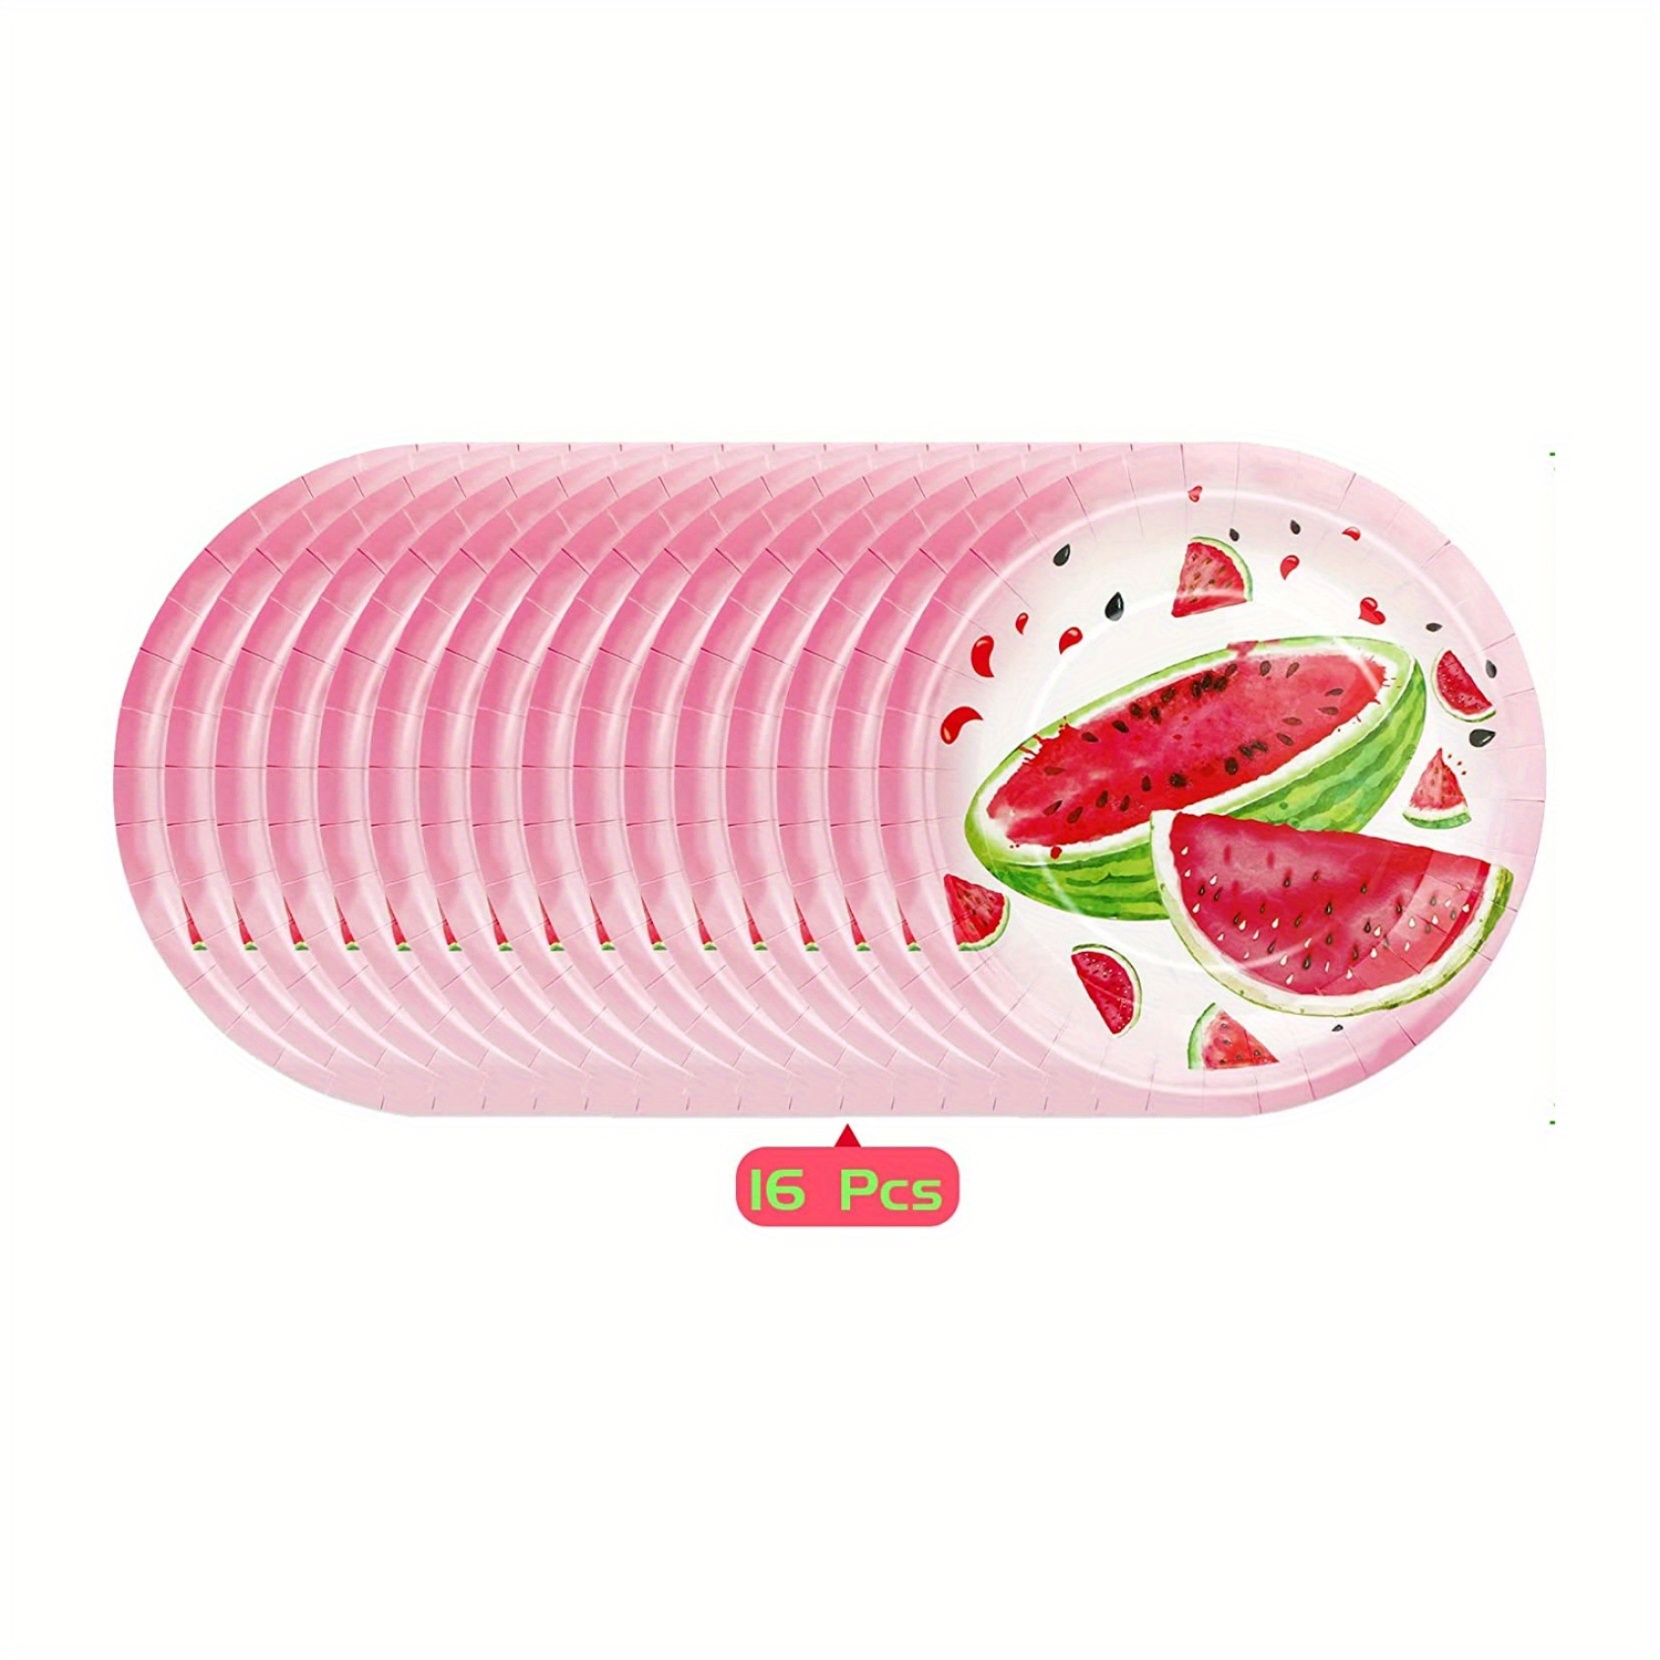 Watermelon Party Supplies 9 inch Paper Plates (9 in. 80 Pack)